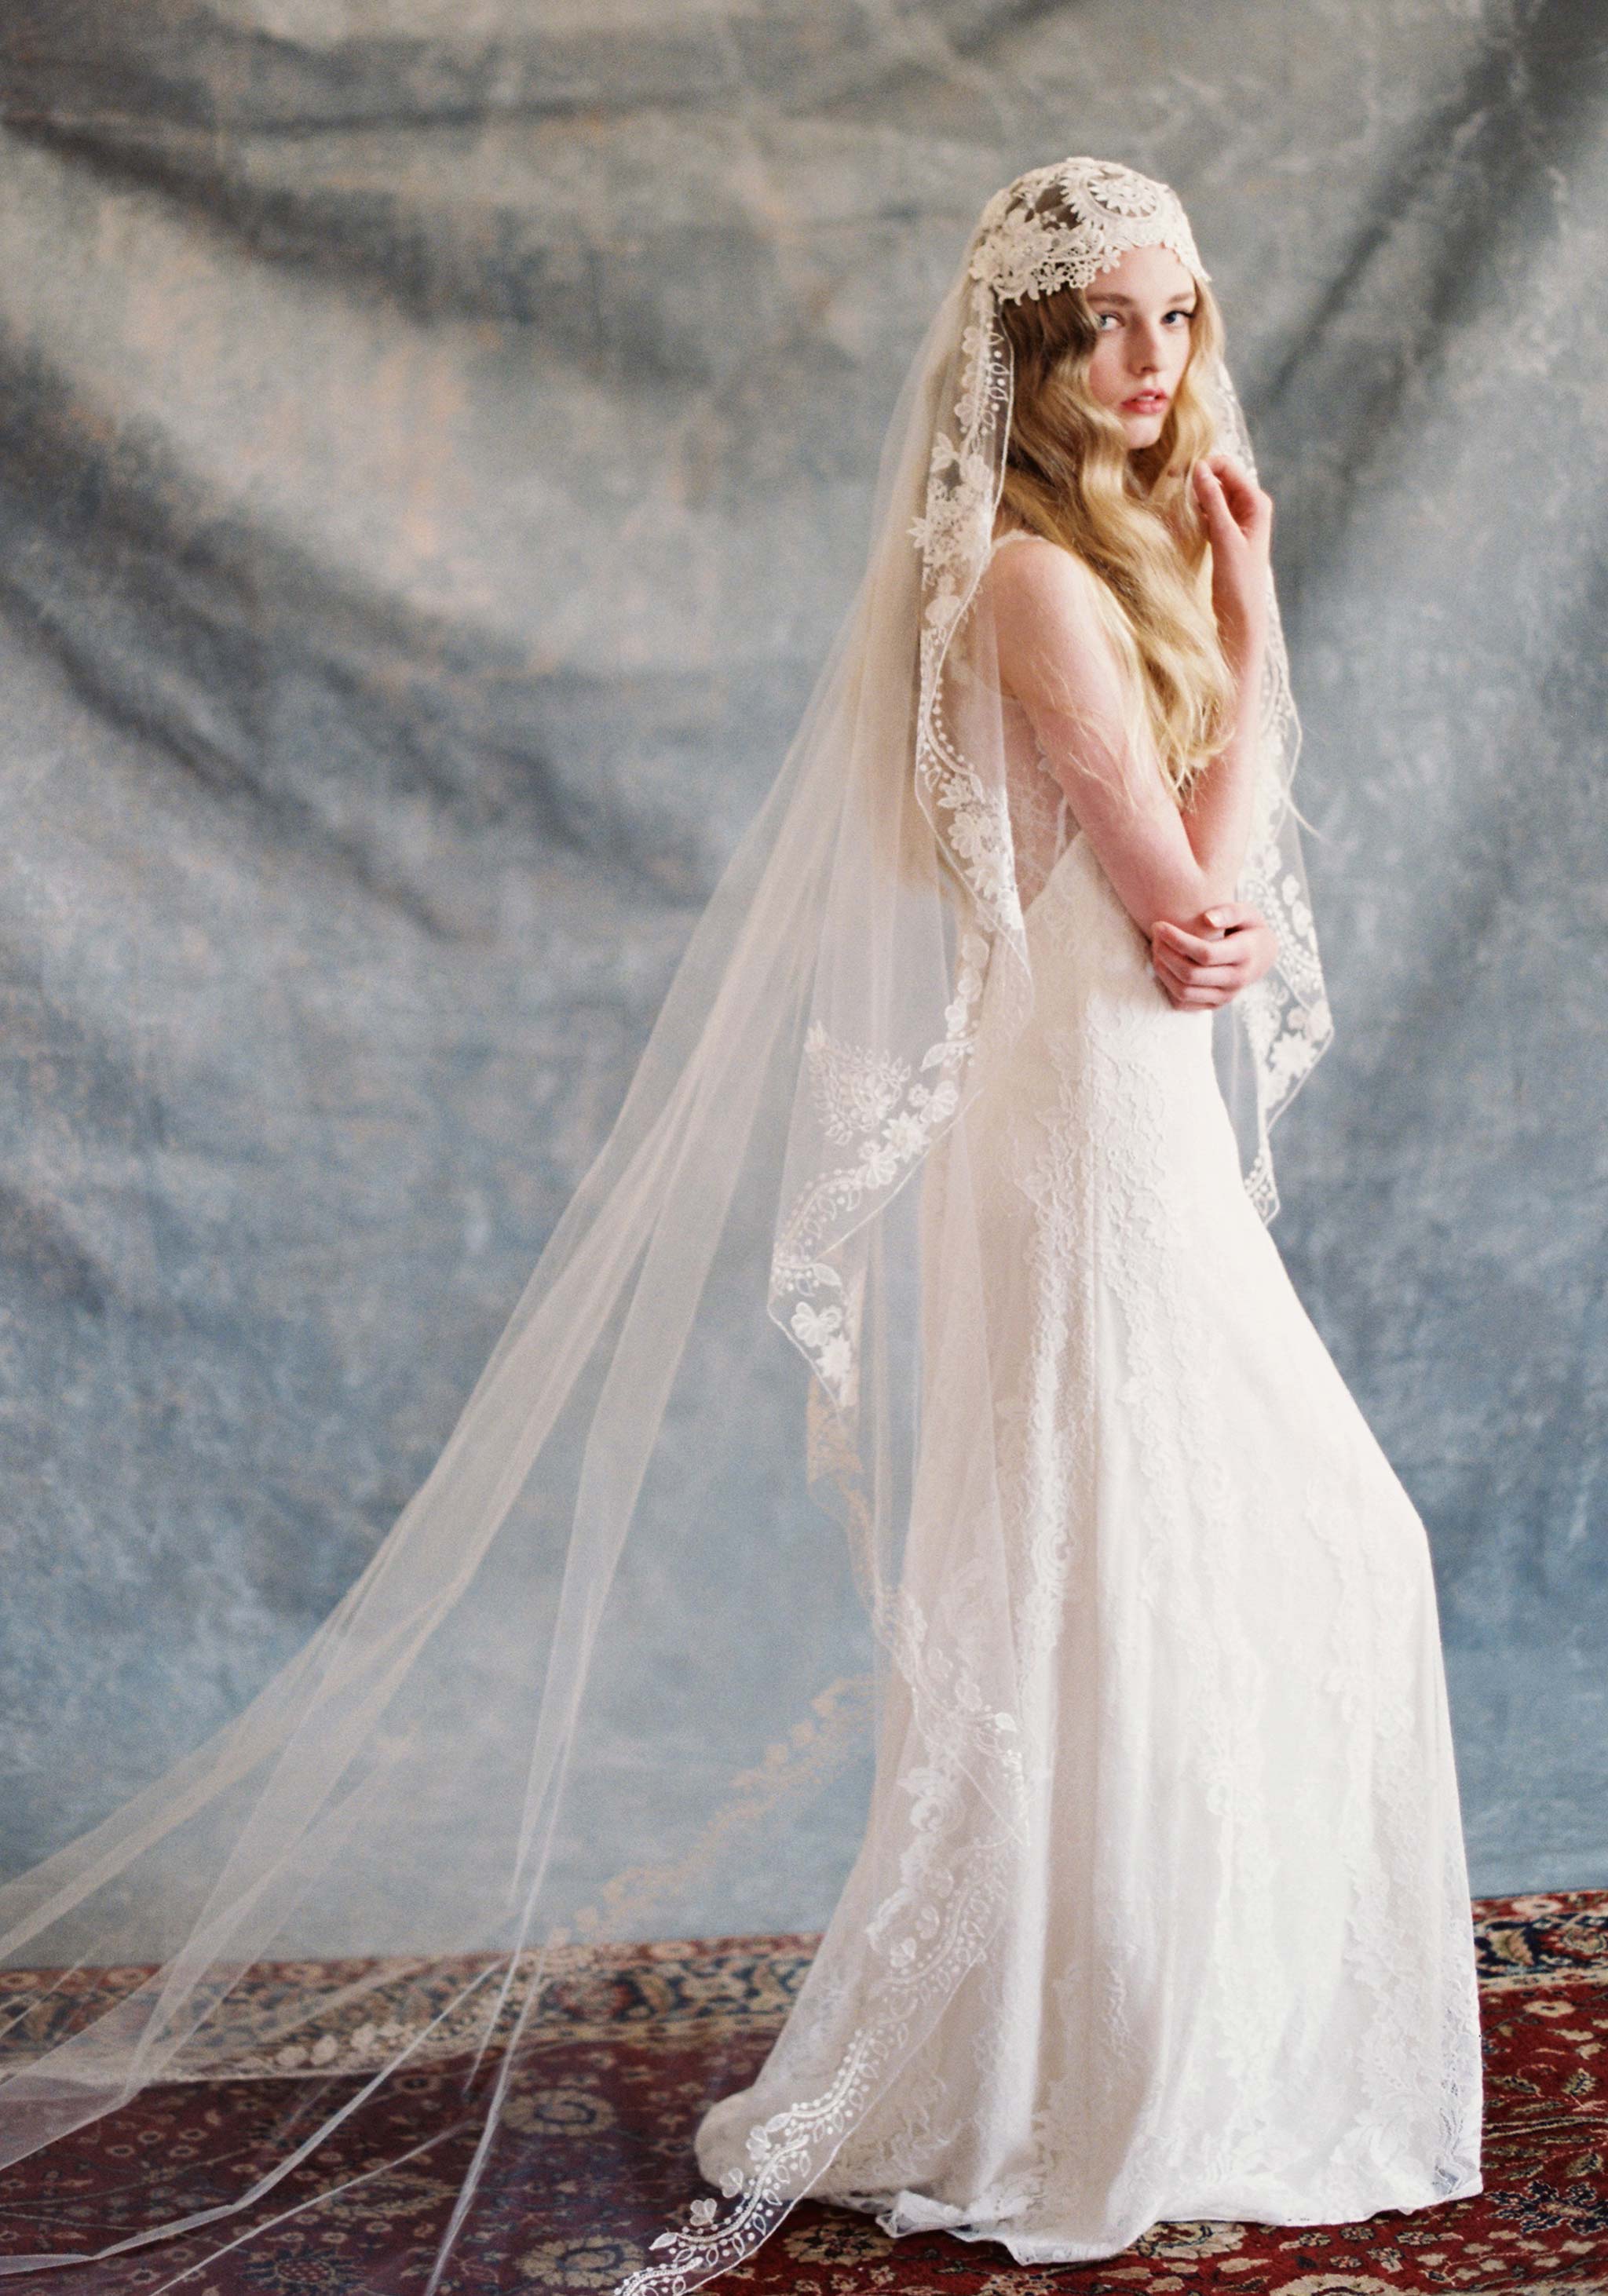 12 Wedding Veil Styles & Lengths, From Shortest to Longest